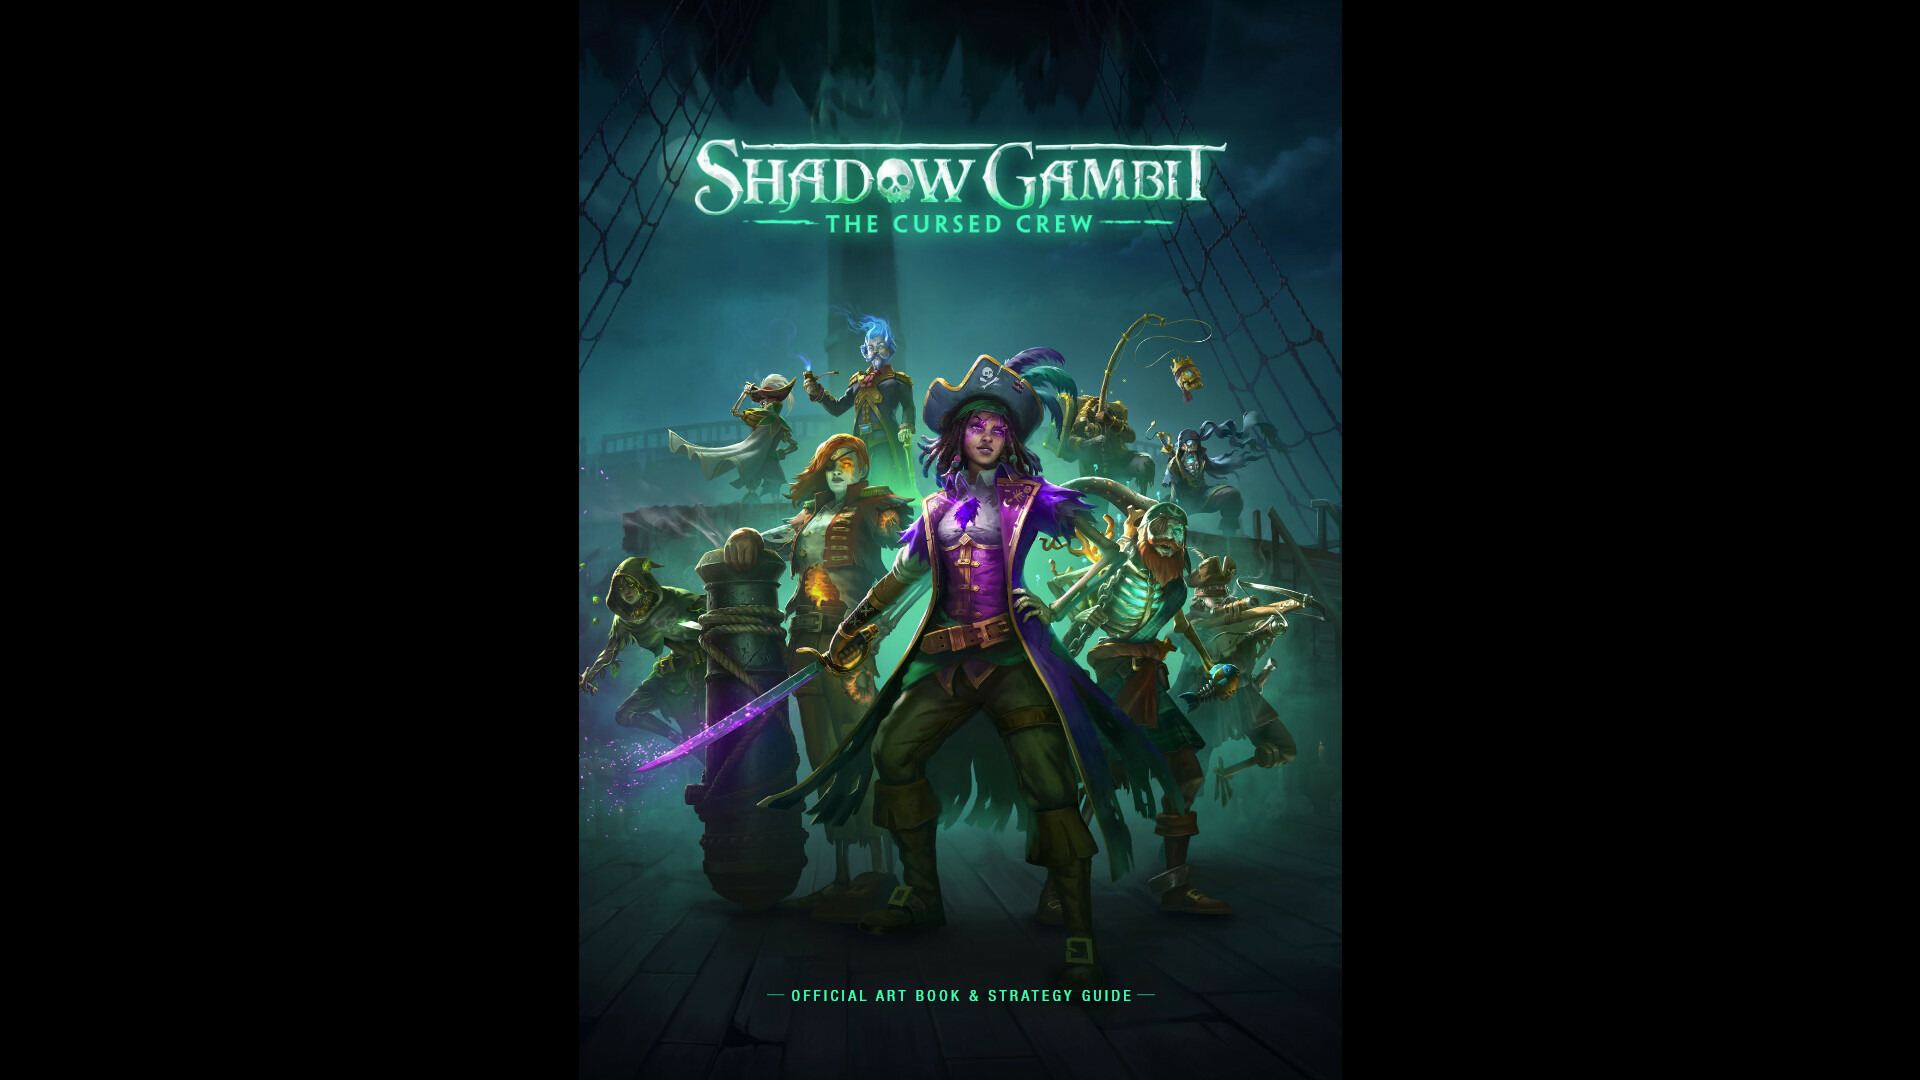 Shadow Gambit: The Cursed Crew Supporter Edition Epic Games Account 31.53 $